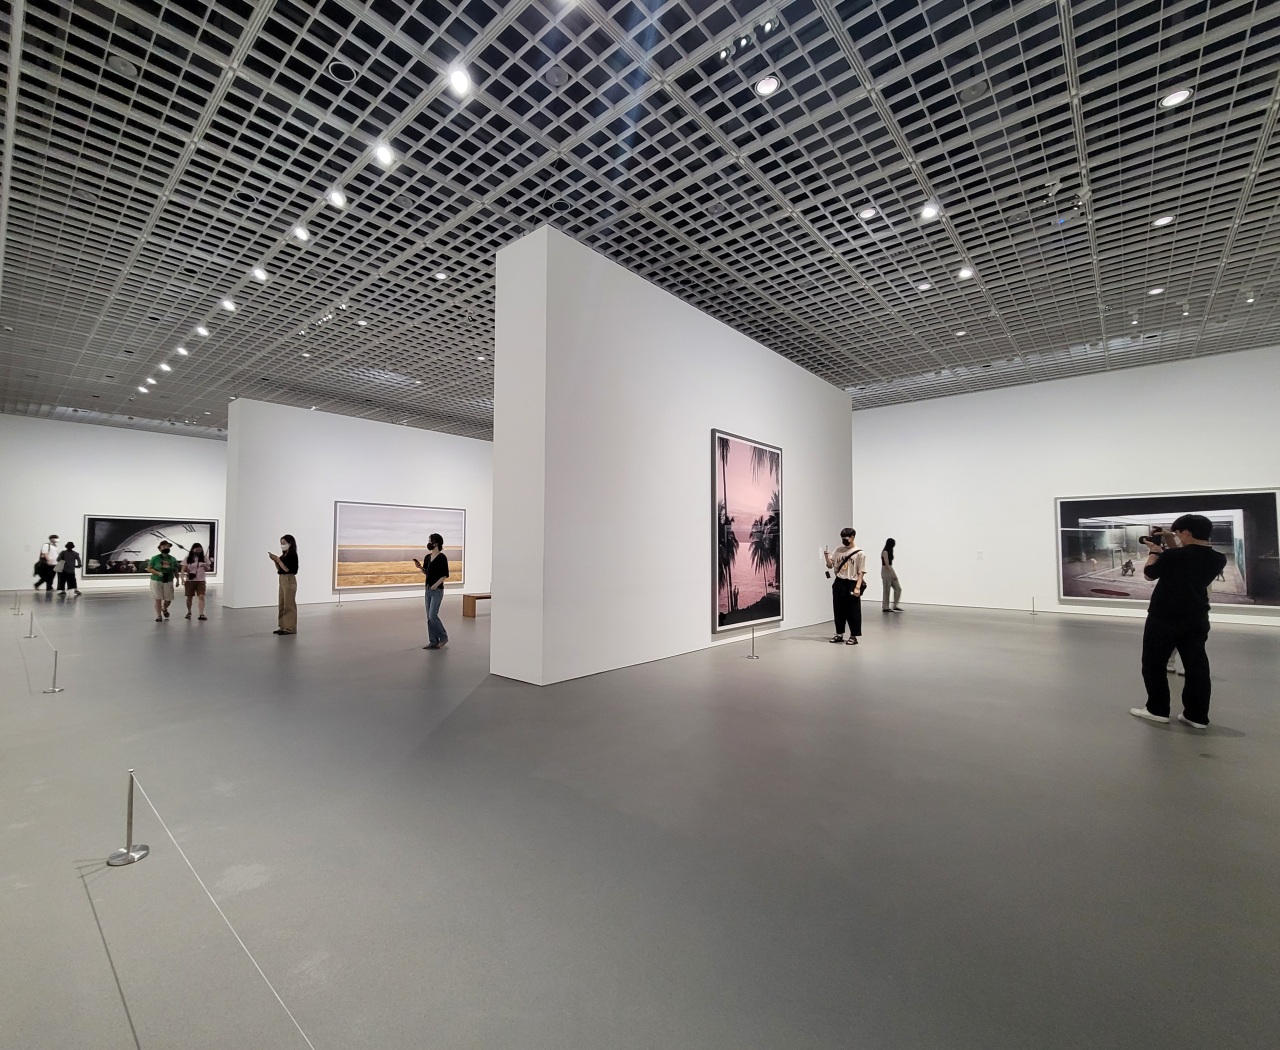 An installation view of “Andreas Gursky” at the Amorepacific Museum of Art (Park Yuna/The Korea Herald)